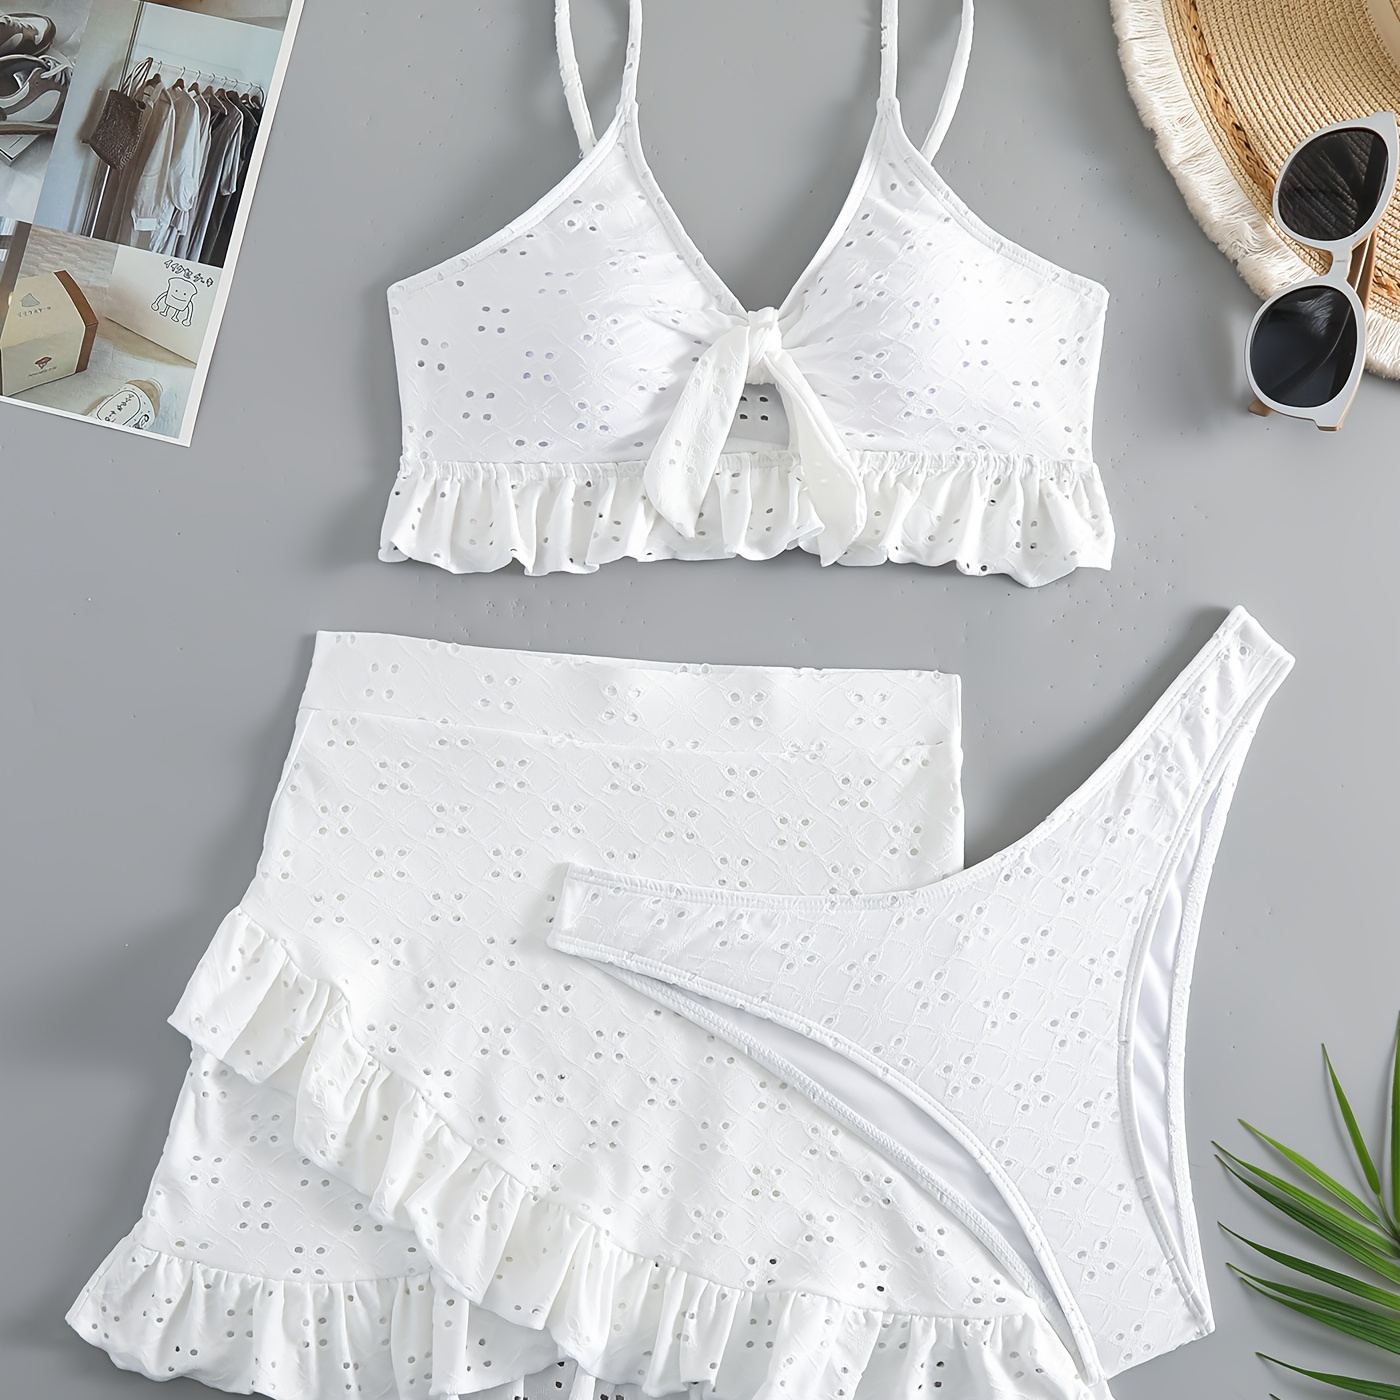 

Hollow Out Solid White 3 Piece Set Swimsuits, V Neck Spaghetti Strap Ruffle Bowknot Bikini & Eyelet Embroidery Cover Up Skirt, Women's Swimwear & Clothing